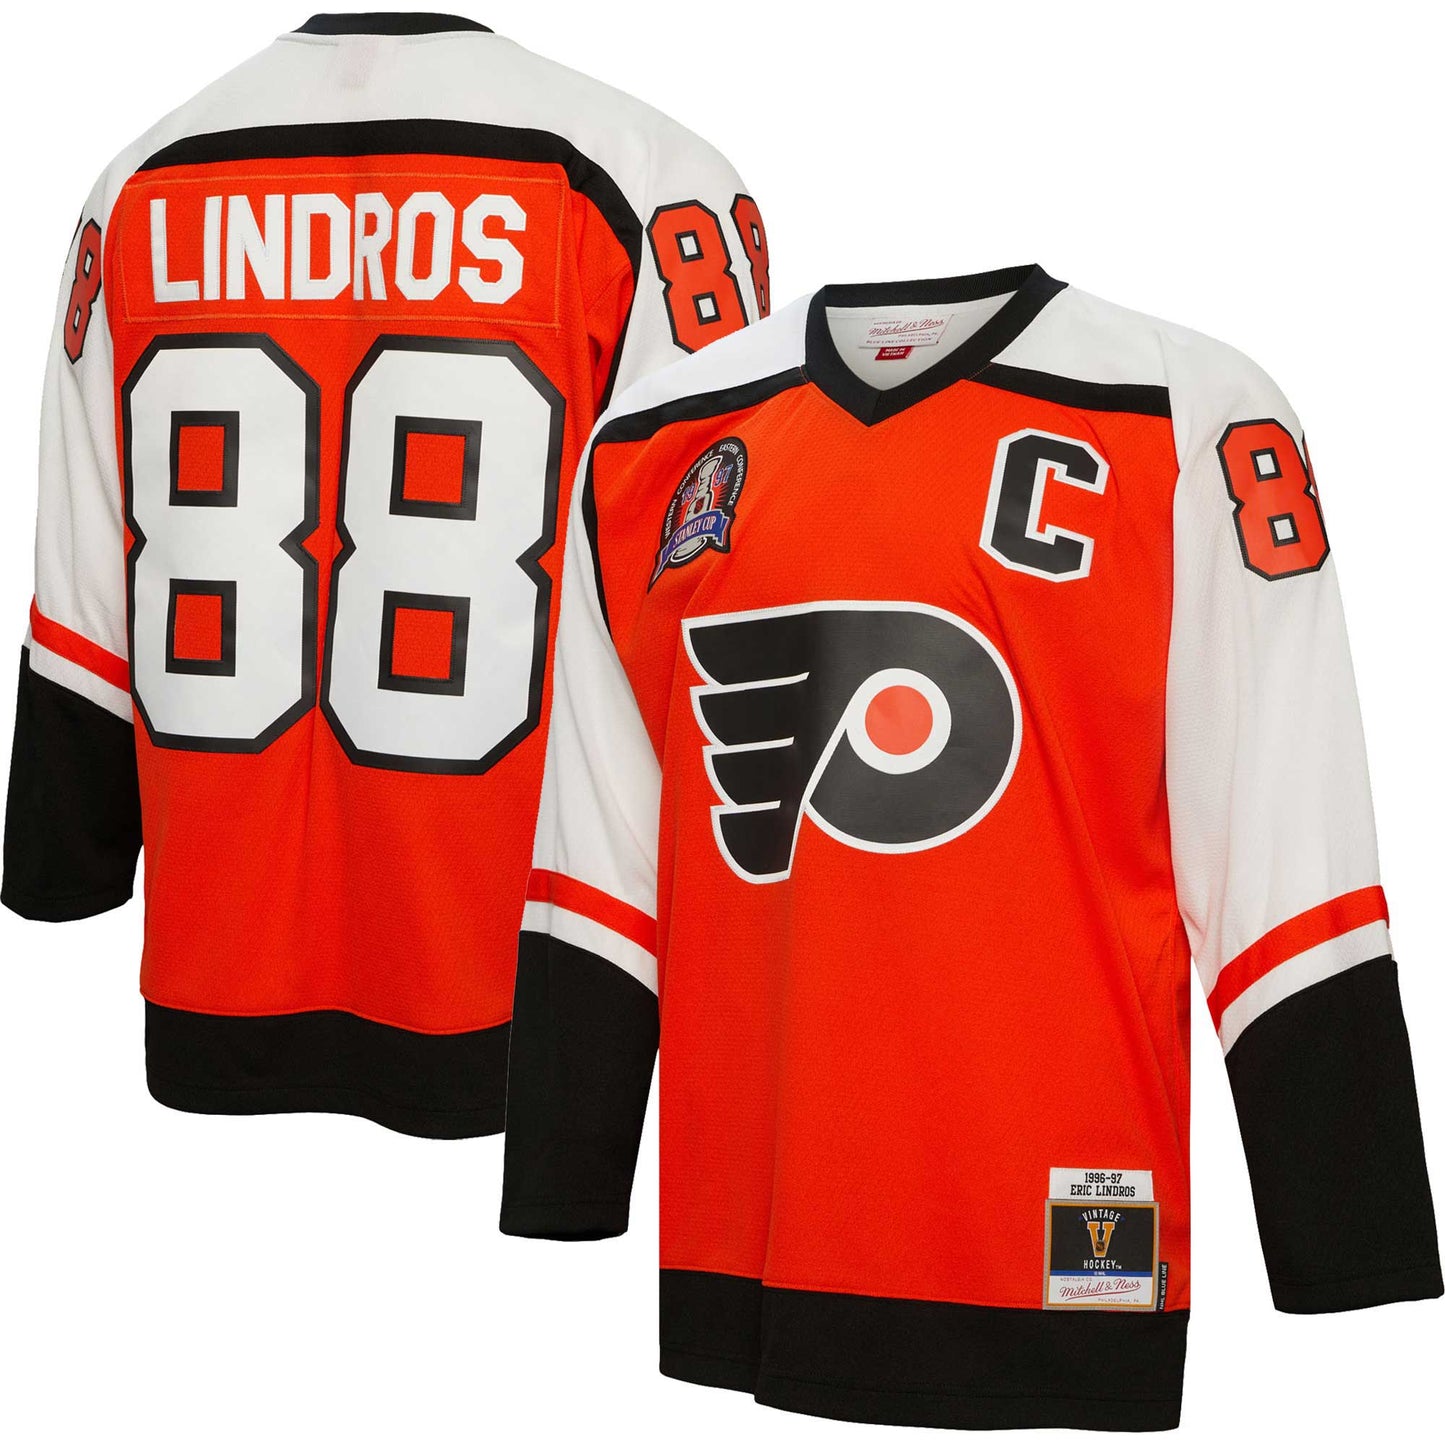 Eric Lindros Philadelphia Flyers Mitchell & Ness 1996/97 Captain Patch Blue Line Player Jersey - Orange